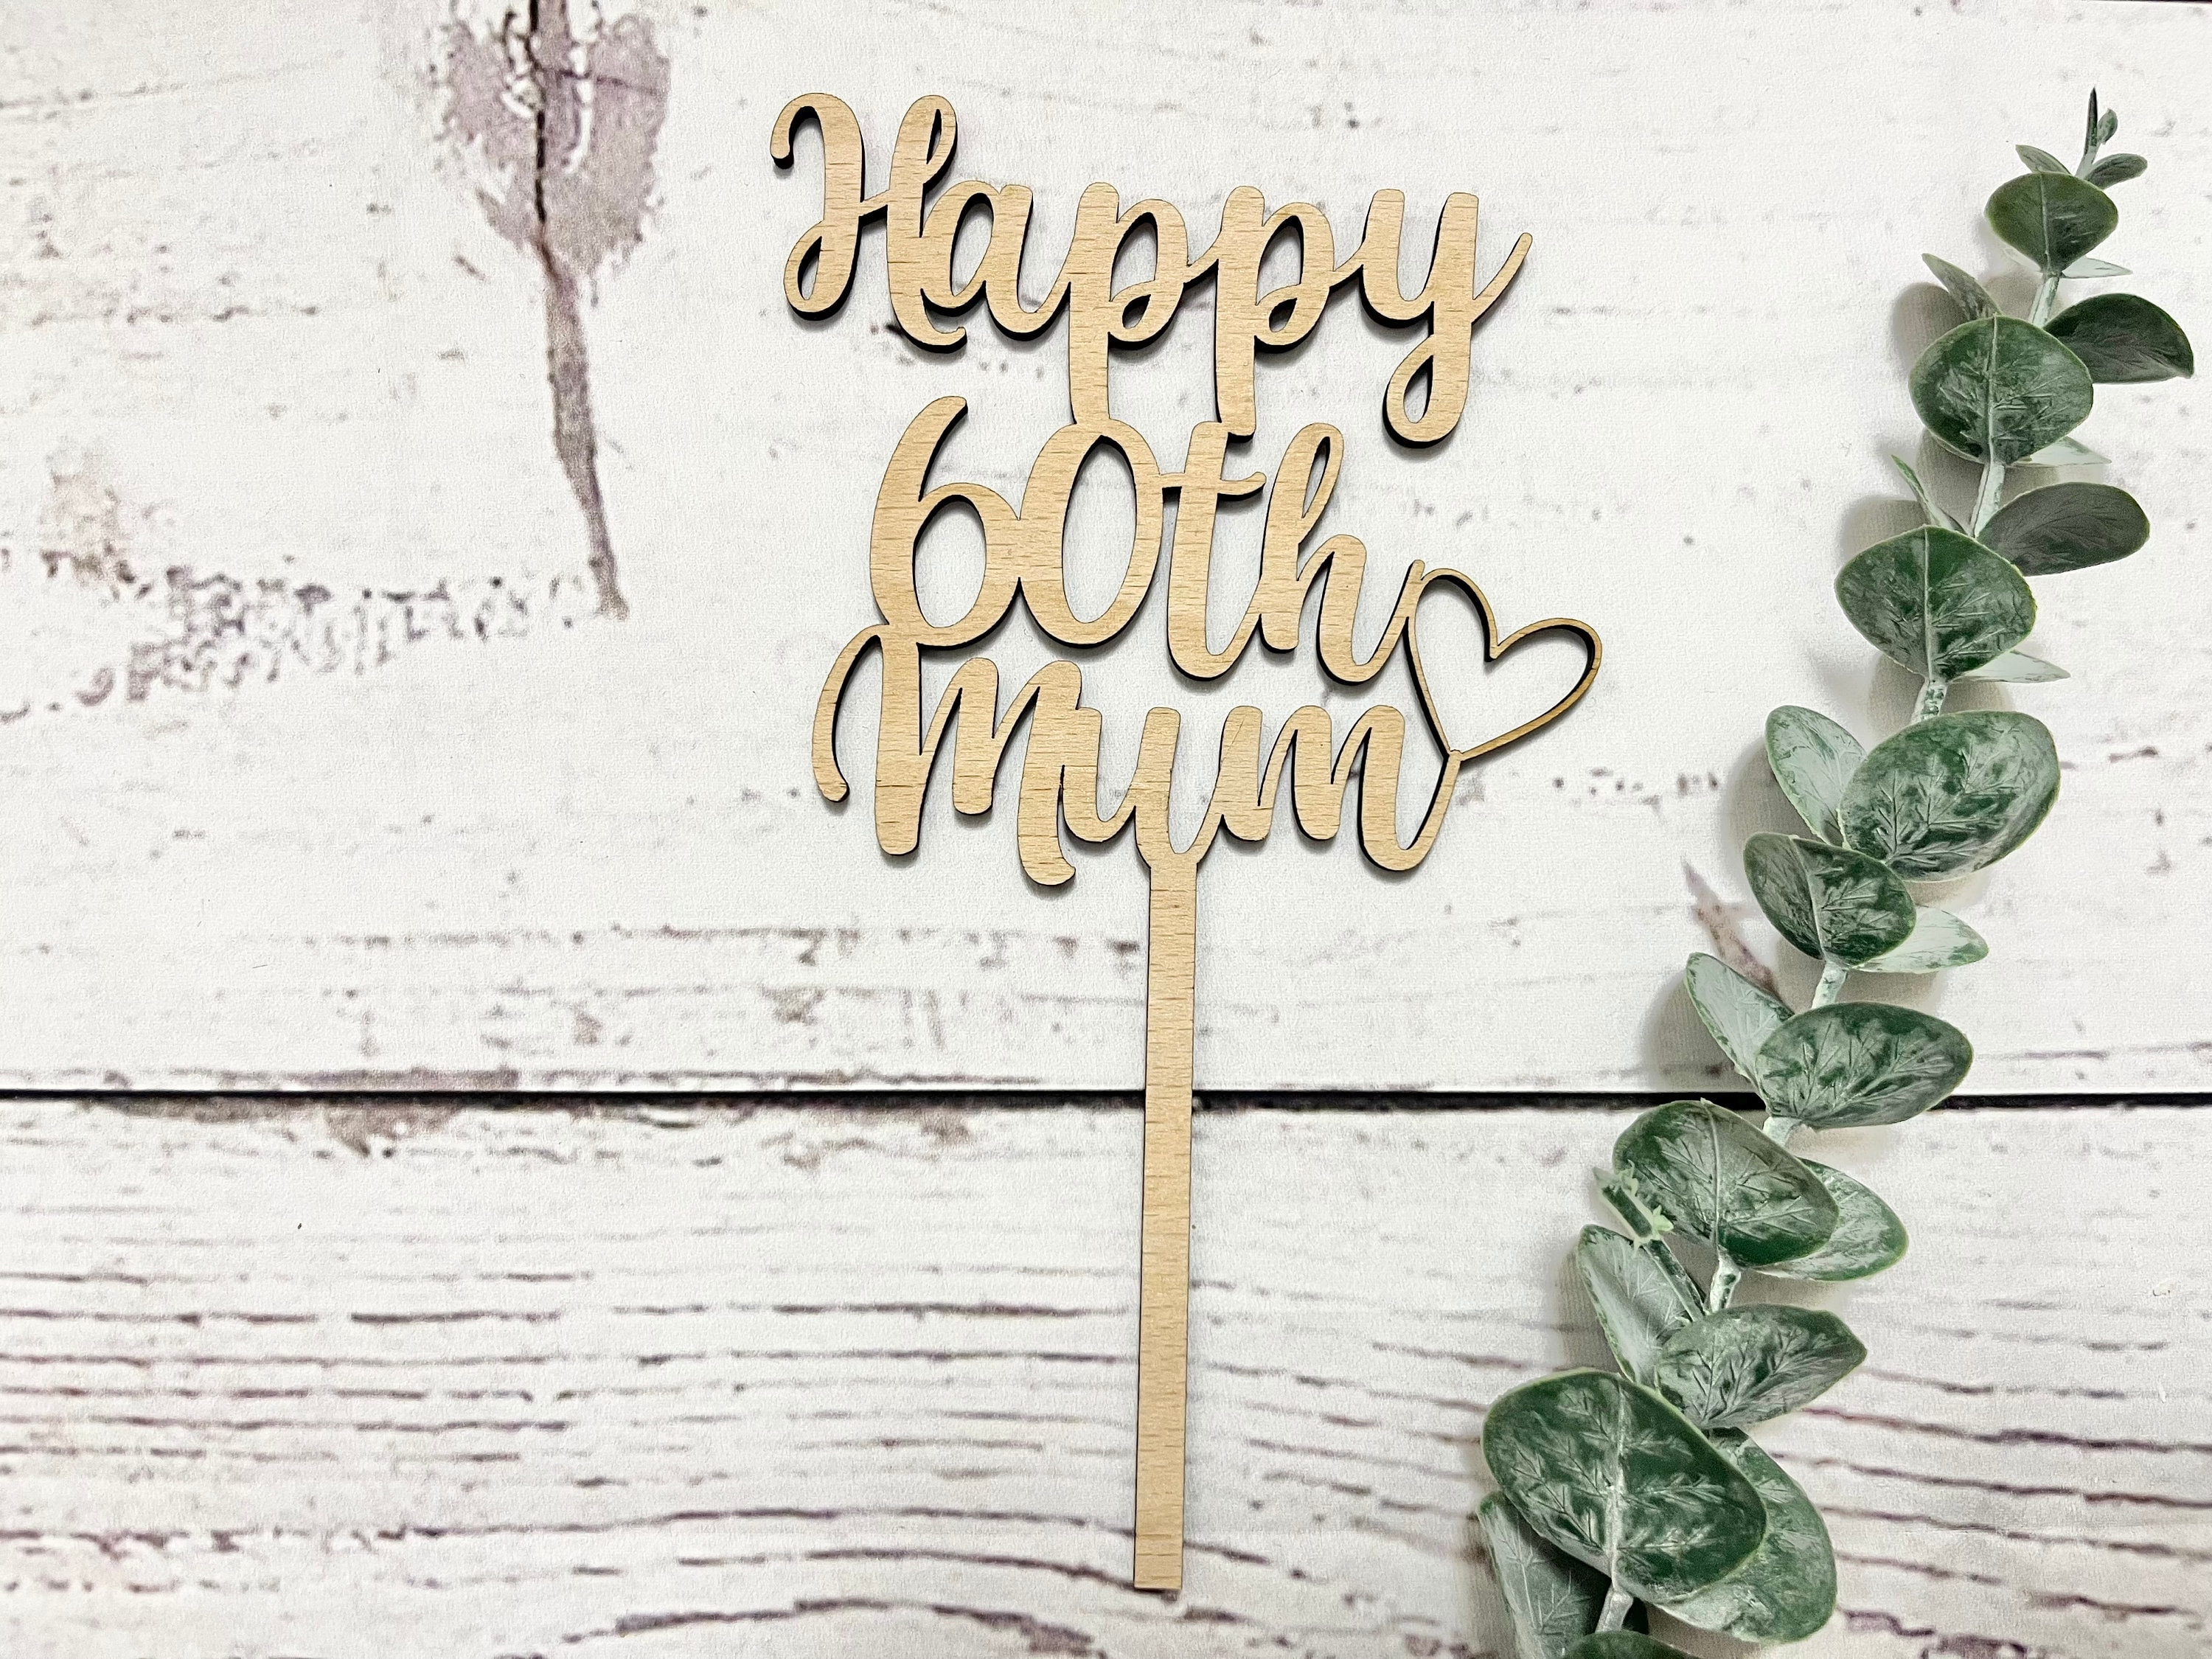 Wooden ONE Sign for First Birthday Decor,1st Birthday One Sign Party Decor  for Baby Toddler Birthday,one Photo Prop,personalized Wood Sign 